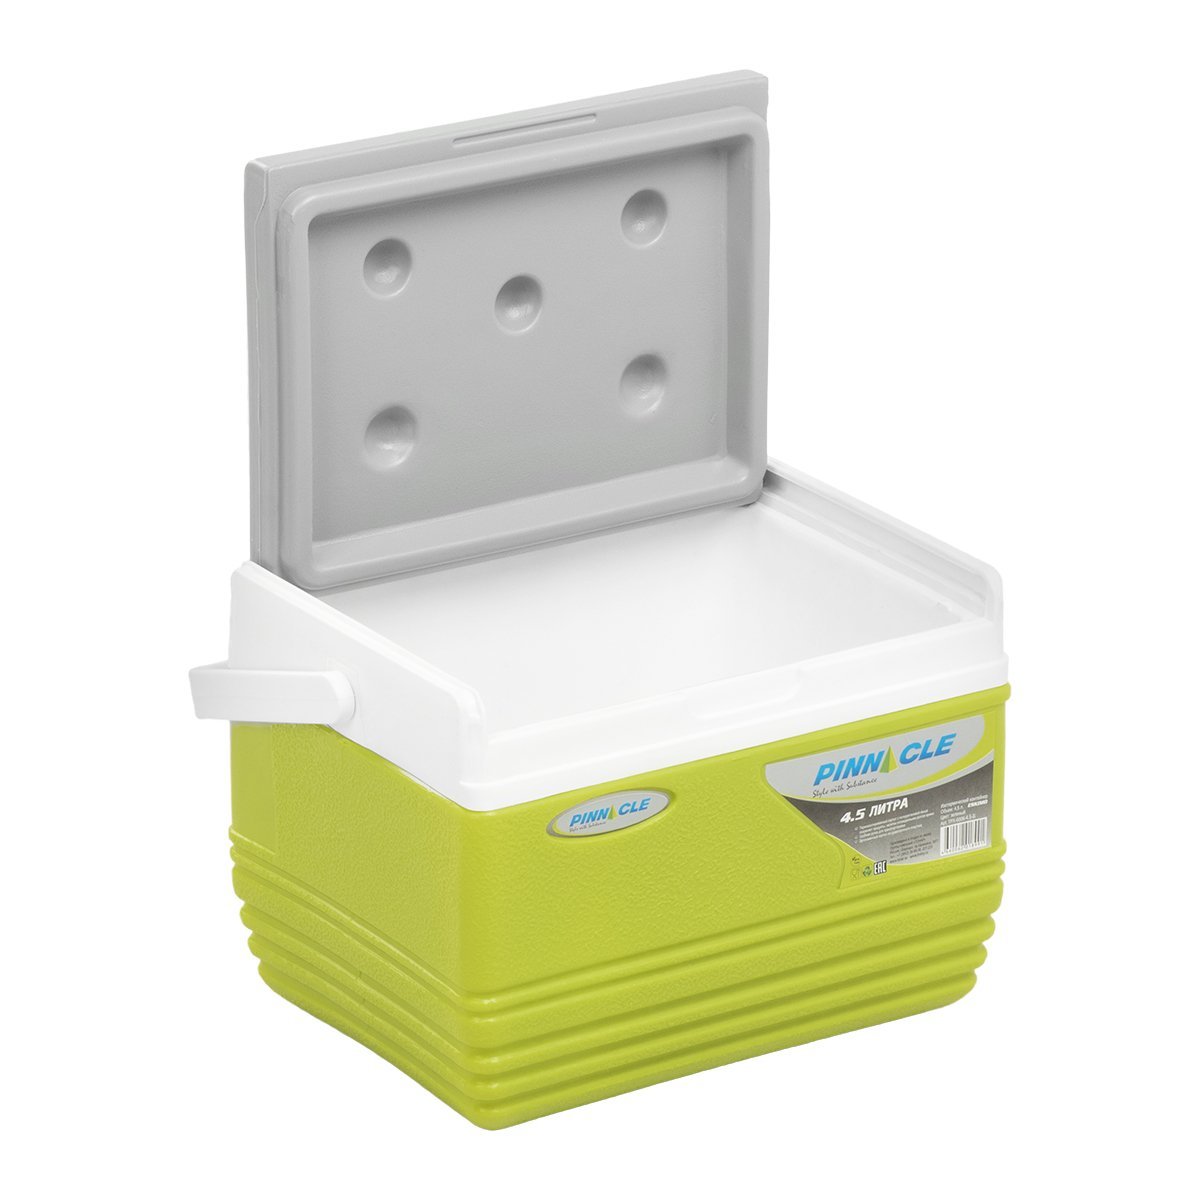 Eskimo Portable Hard-Sided Ice Chest for Camping, 4 qt, Green with a lid widely open